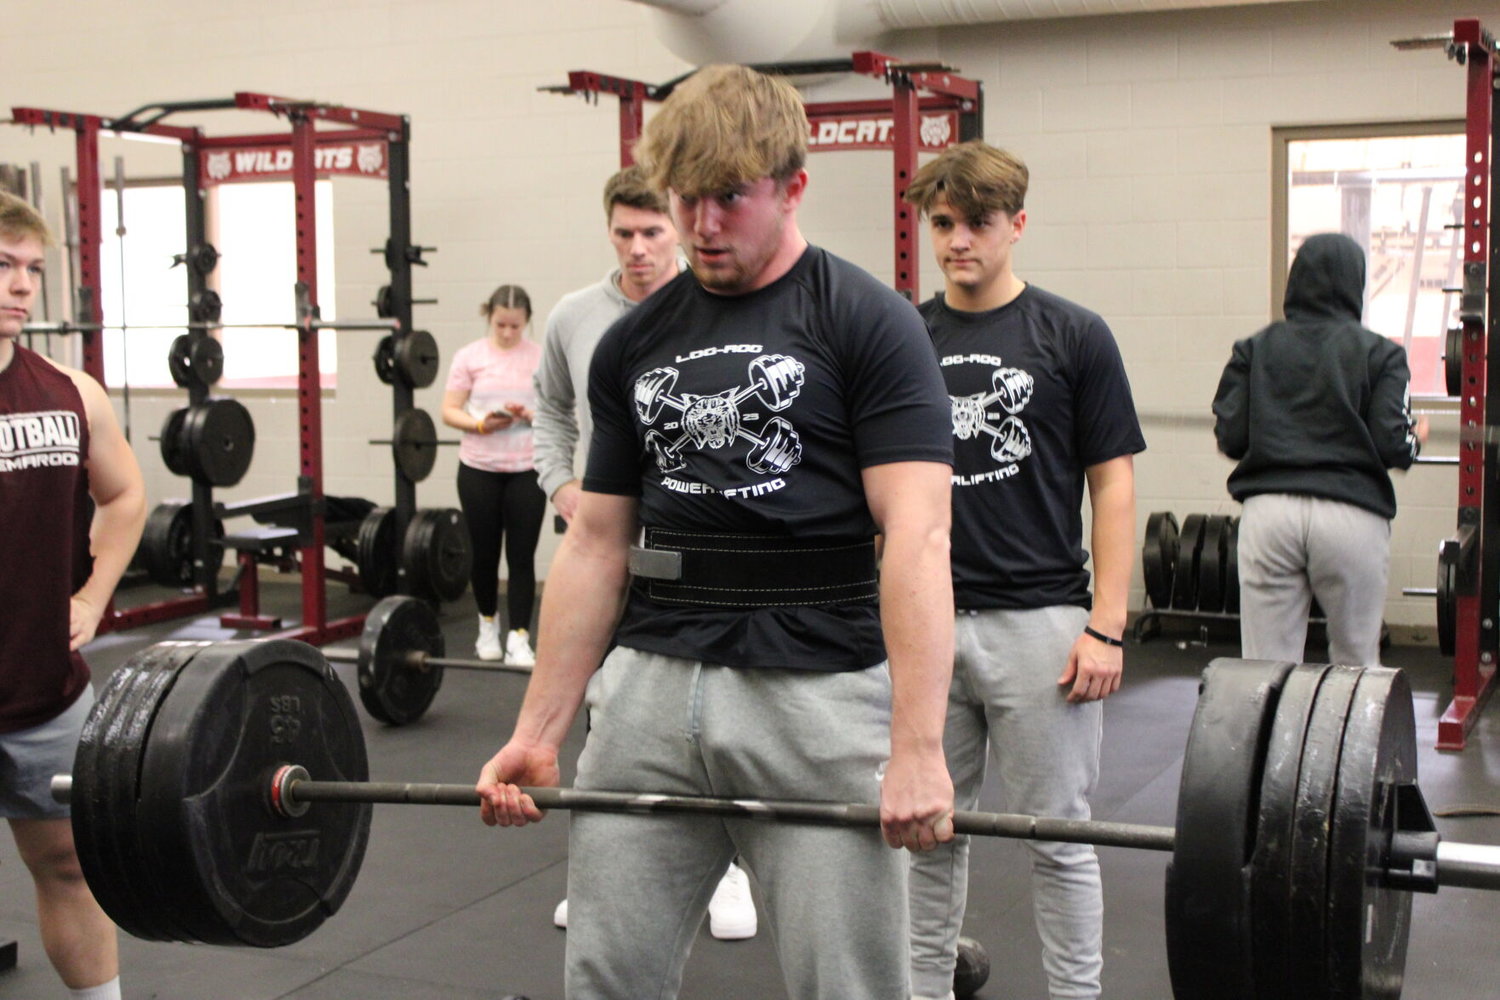 Senior Luke Hauer is pictured here practicing Deadlifts for the upcoming meet March 4 at Glendale.


Hauer mentions "My bench is definitely my best. My squats up there too, but my deadlifts are where I've been lacking, So gotta get that up."


Mail Photo by John "J.T." Jones